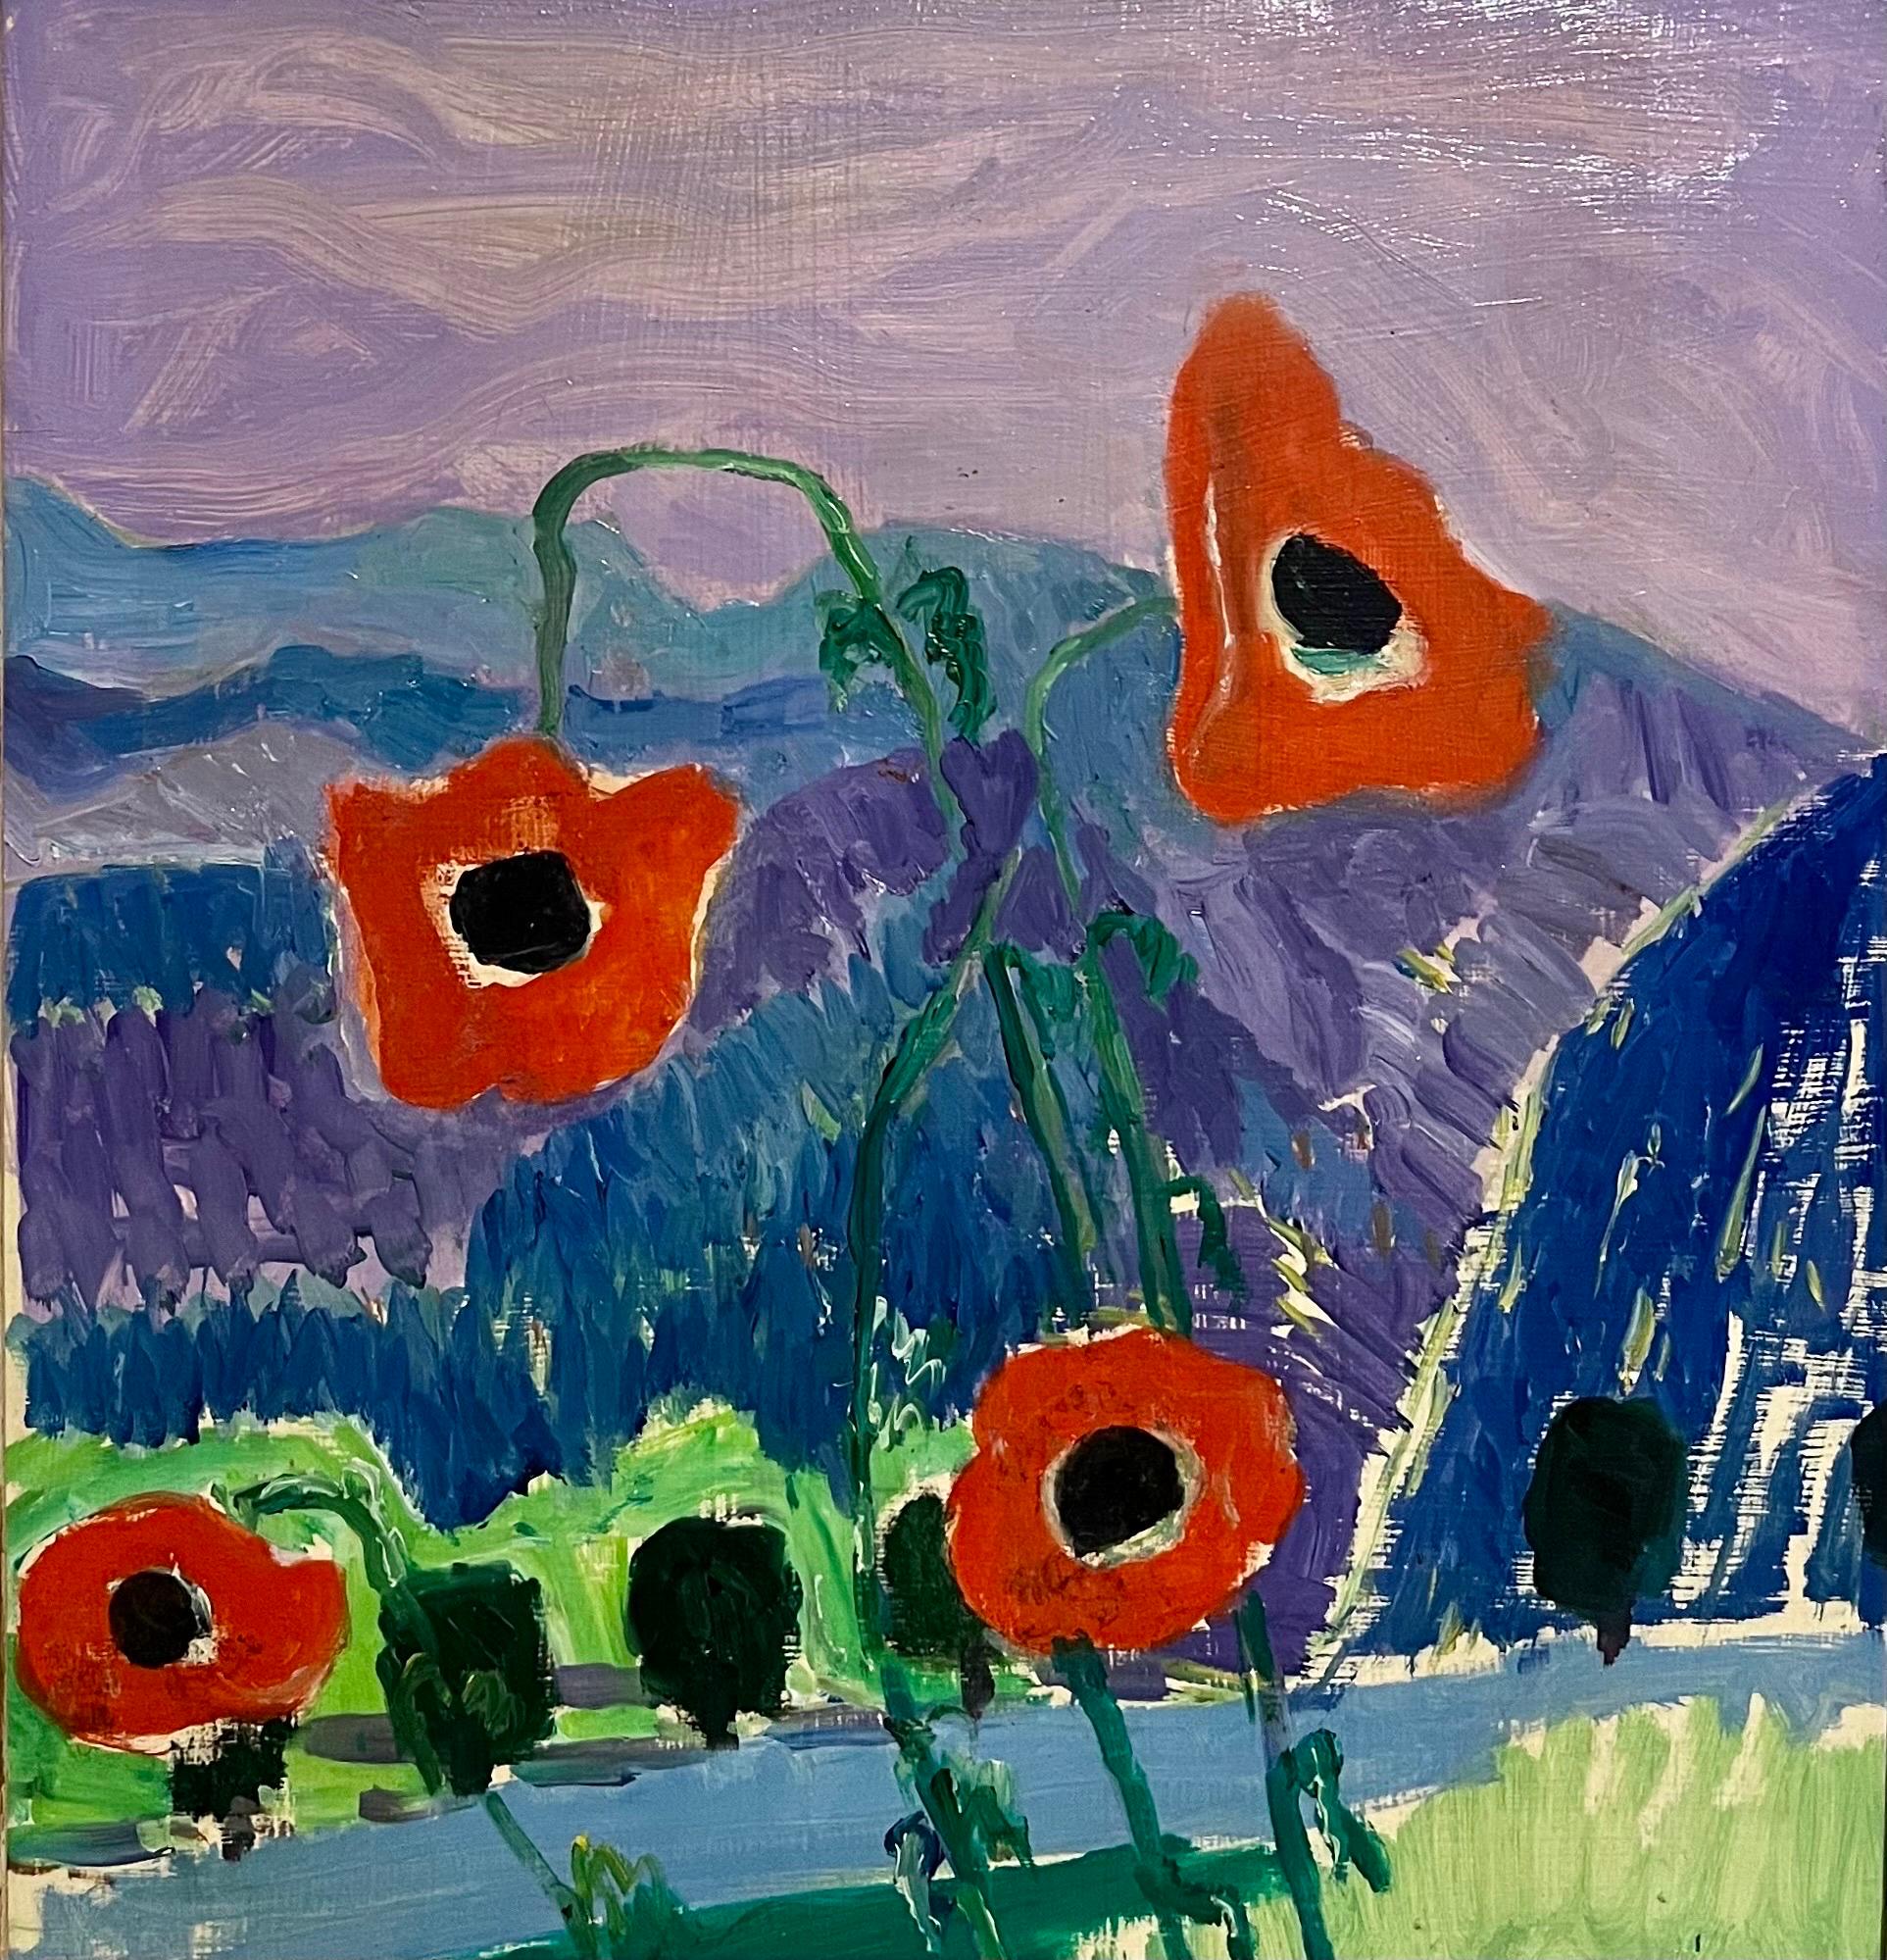 
Frederick Serger 
Genre: Post Impressionist
Subject: Flowers, Poppies
Medium: Oil
Surface: Panel


Frederick Serger (given name Frederick Bedrick Sinaberger) was born in 1889 to a family of Jewish manufacturers in the village of Ivancice near Brno